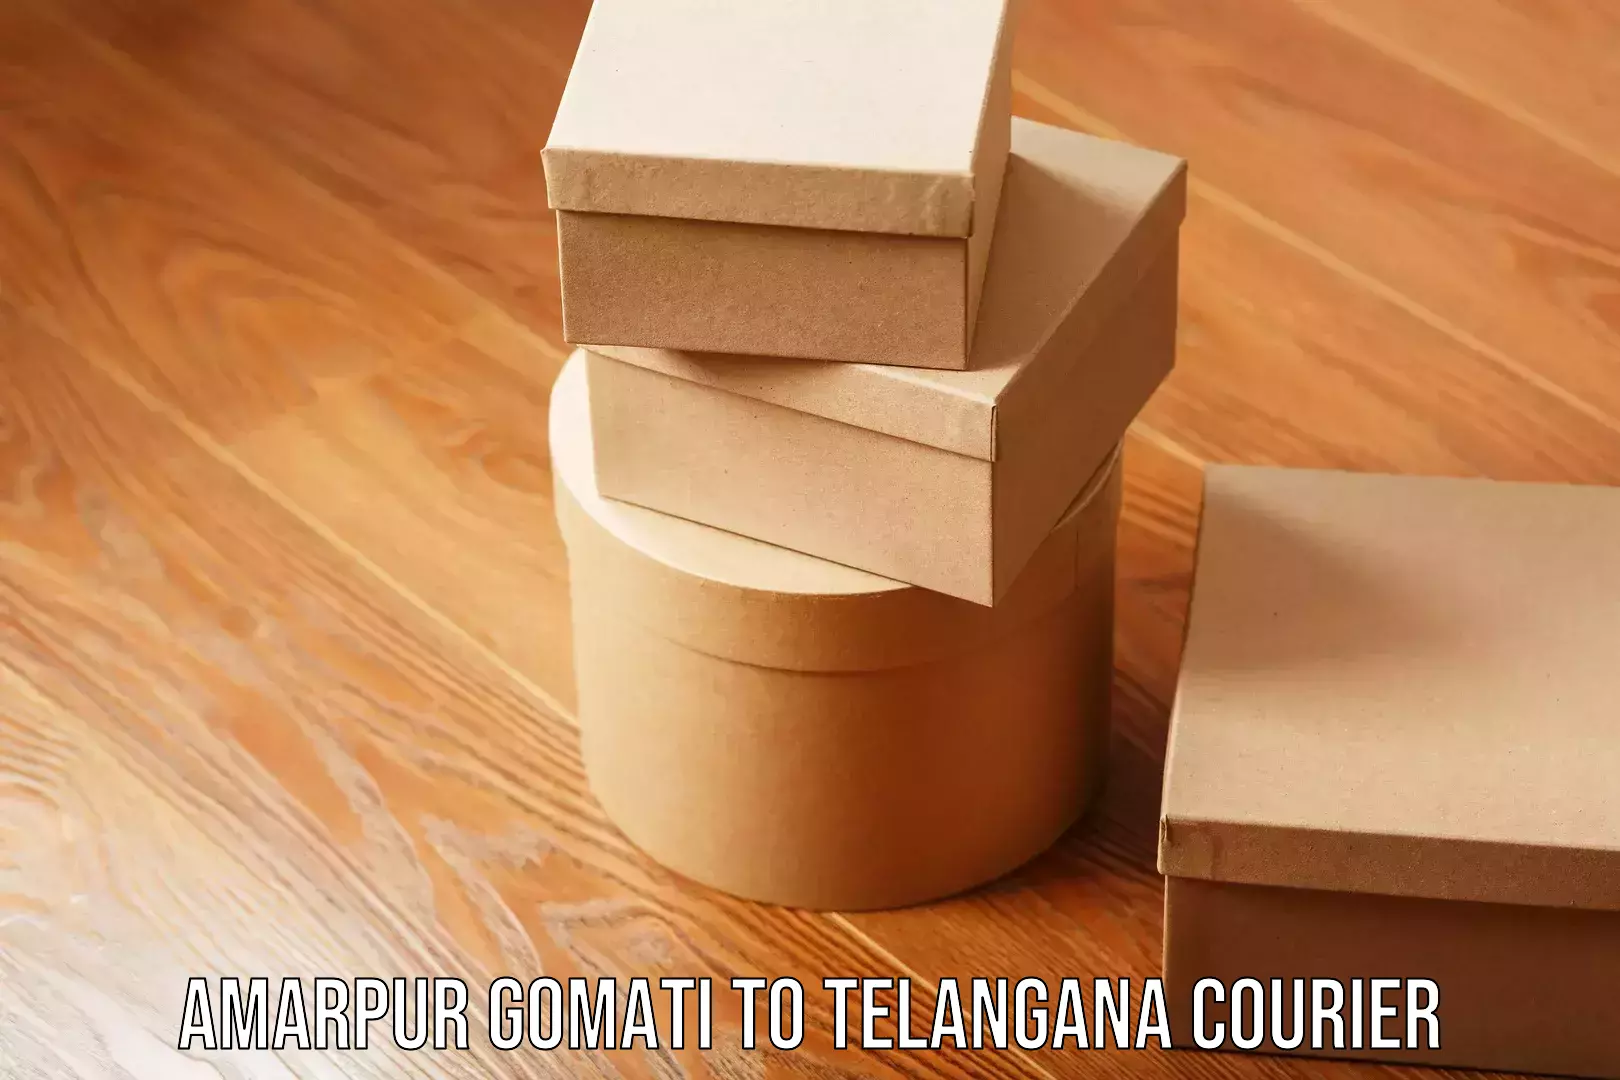 Easy access courier services Amarpur Gomati to Telangana